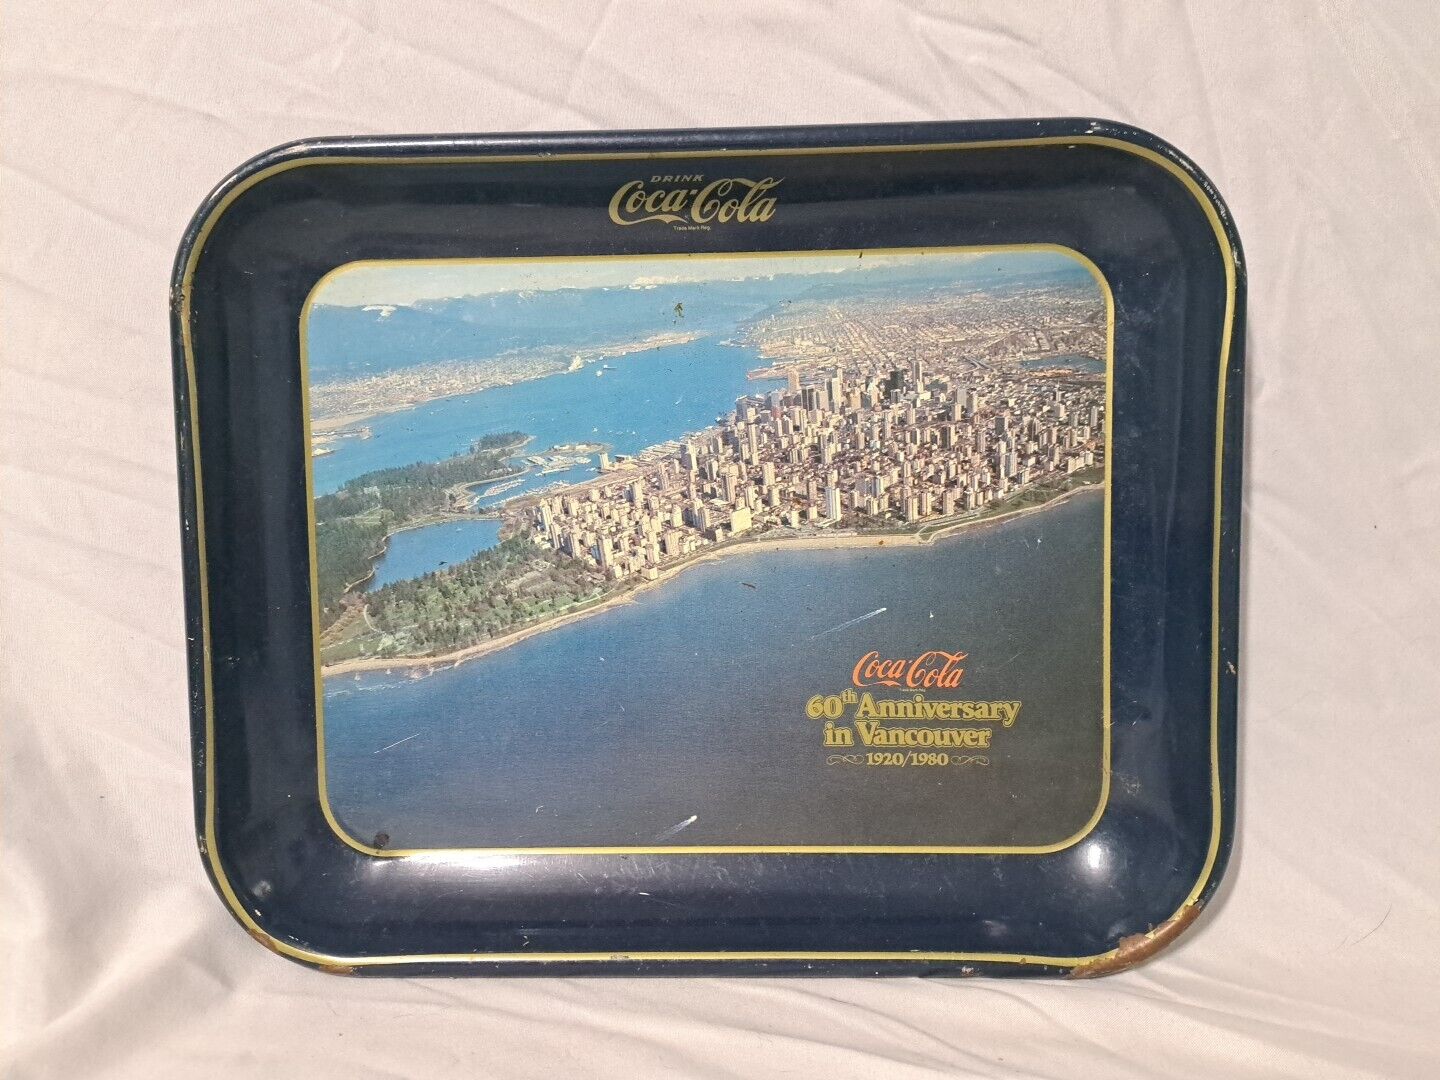 VINTAGE COCA-COLA SERVING TRAY LIMITED CANADIAN EDITION 60TH ANNIVERSARY 